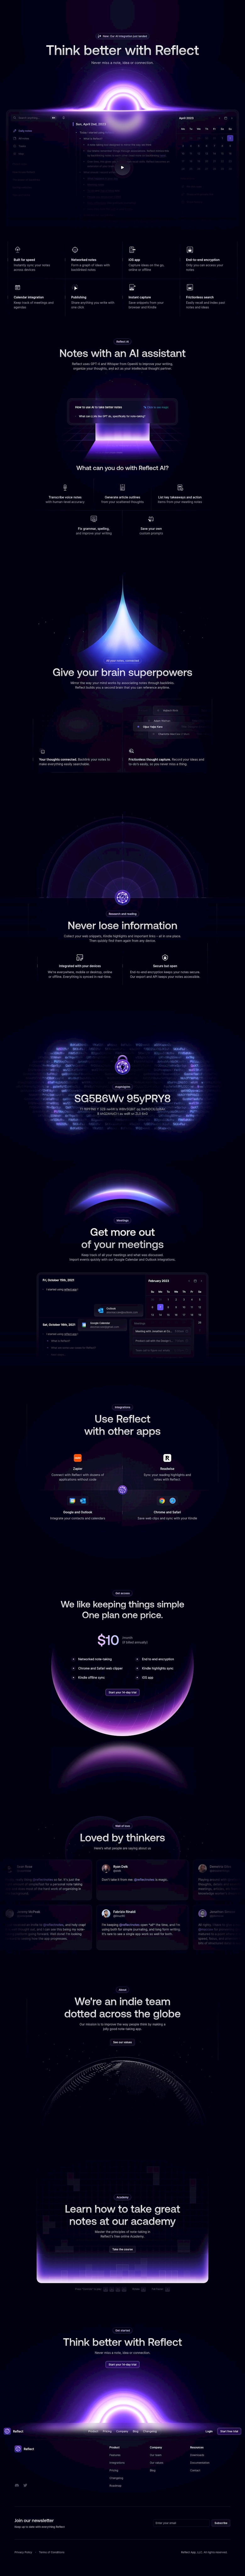 Reflect Notes landing page design